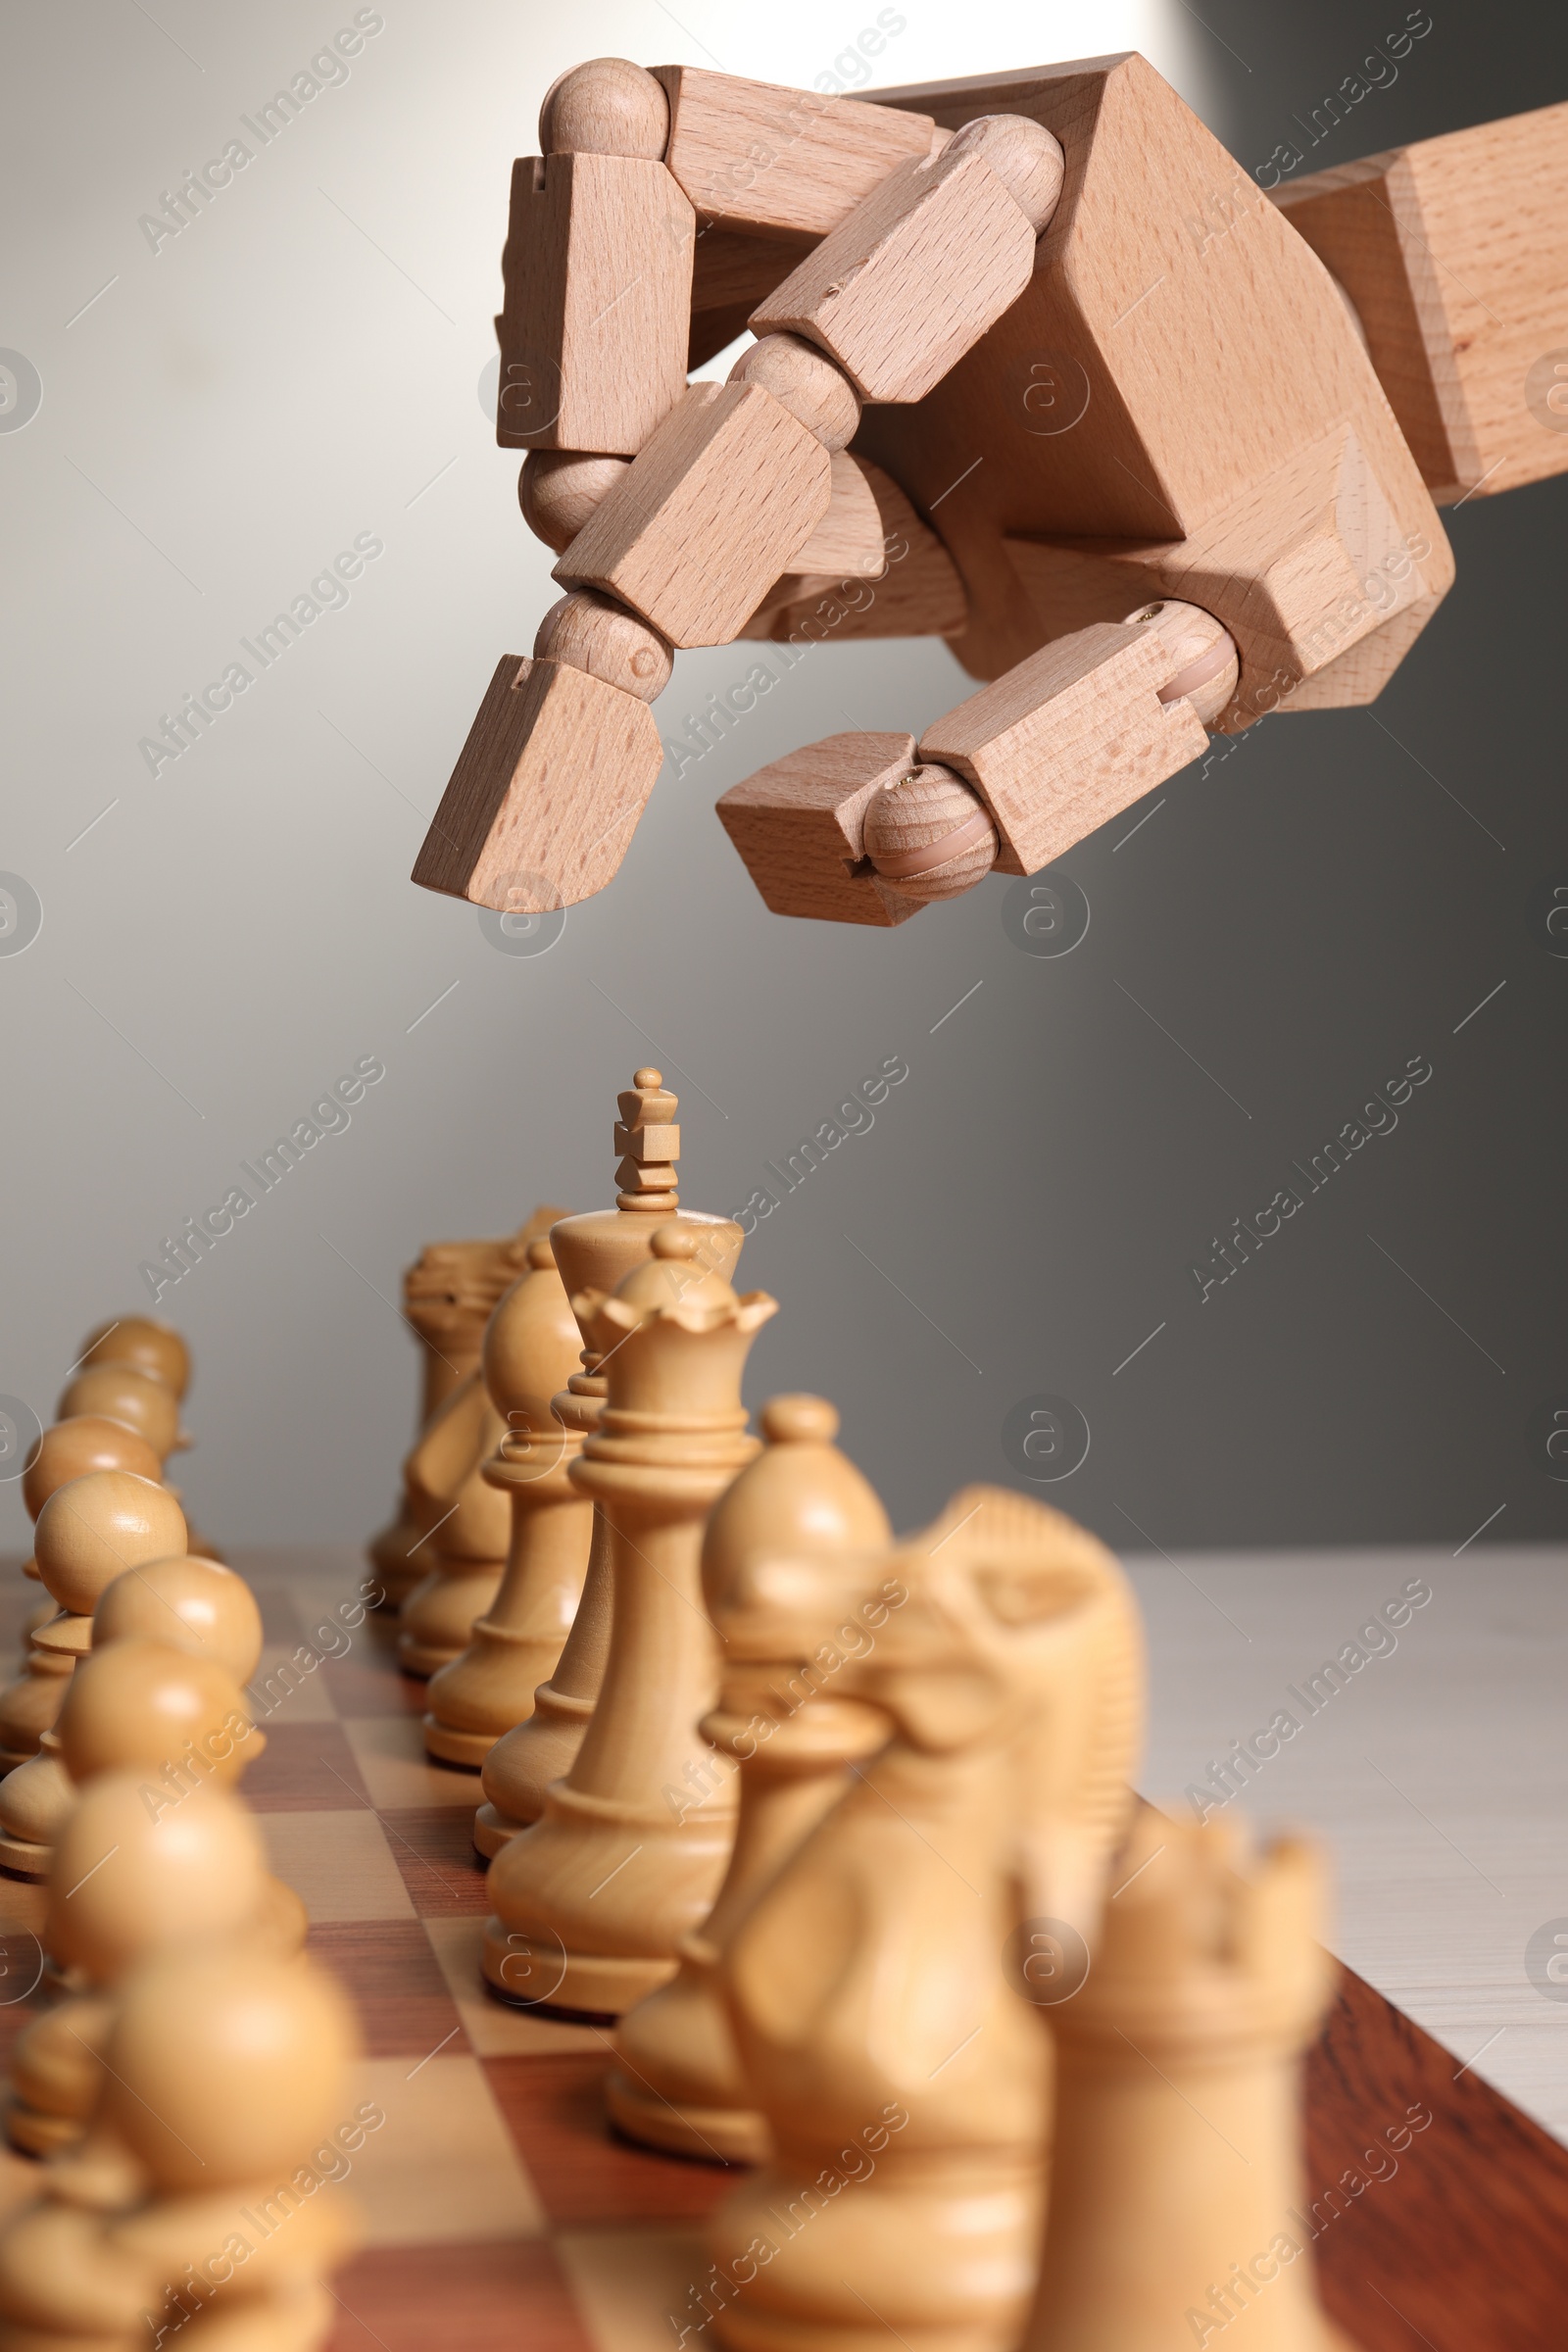 Photo of Robot playing chess against light grey background, closeup. Wooden hand representing artificial intelligence